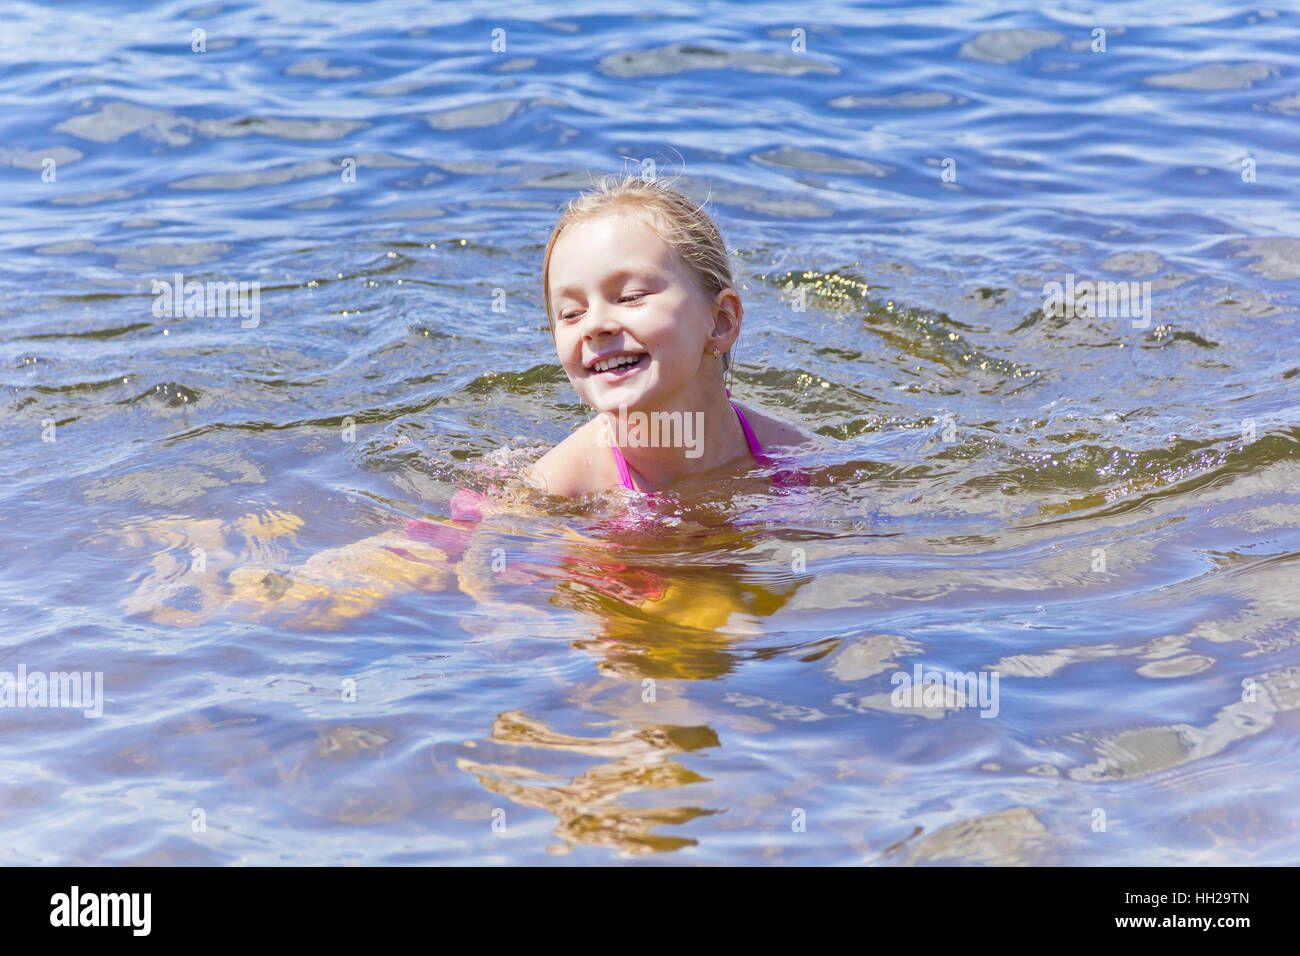 Swimming smiling cute girl seven years old Stock Photo